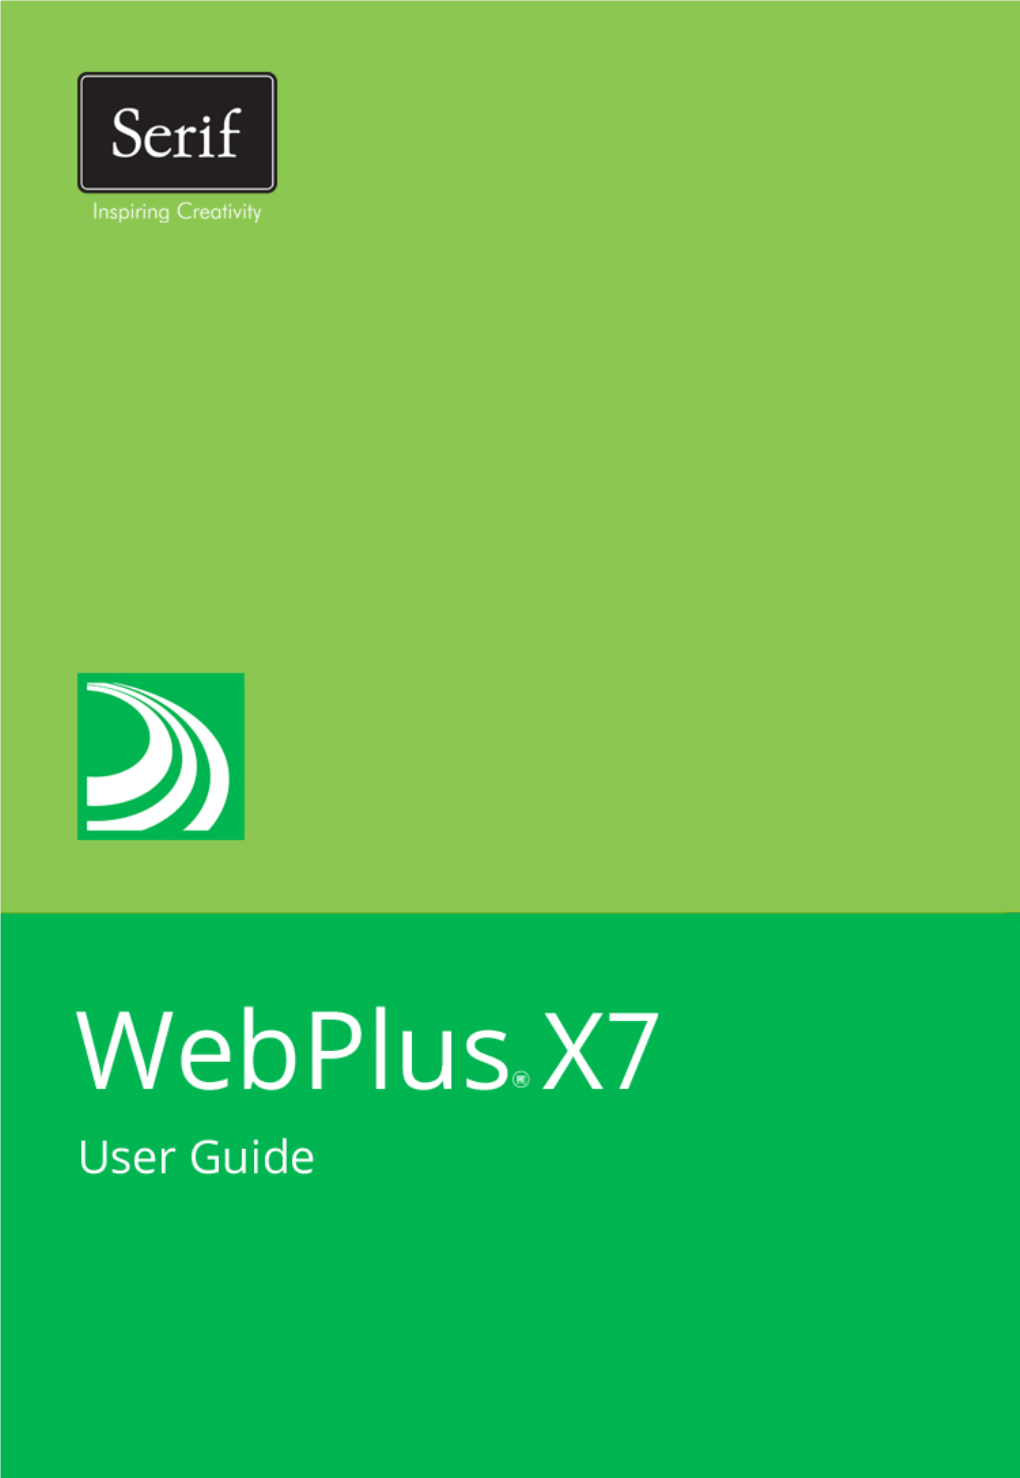 Webplus X7 User Guide Is Provided for the New Or Inexperienced User to Get the Very Best out of Webplus